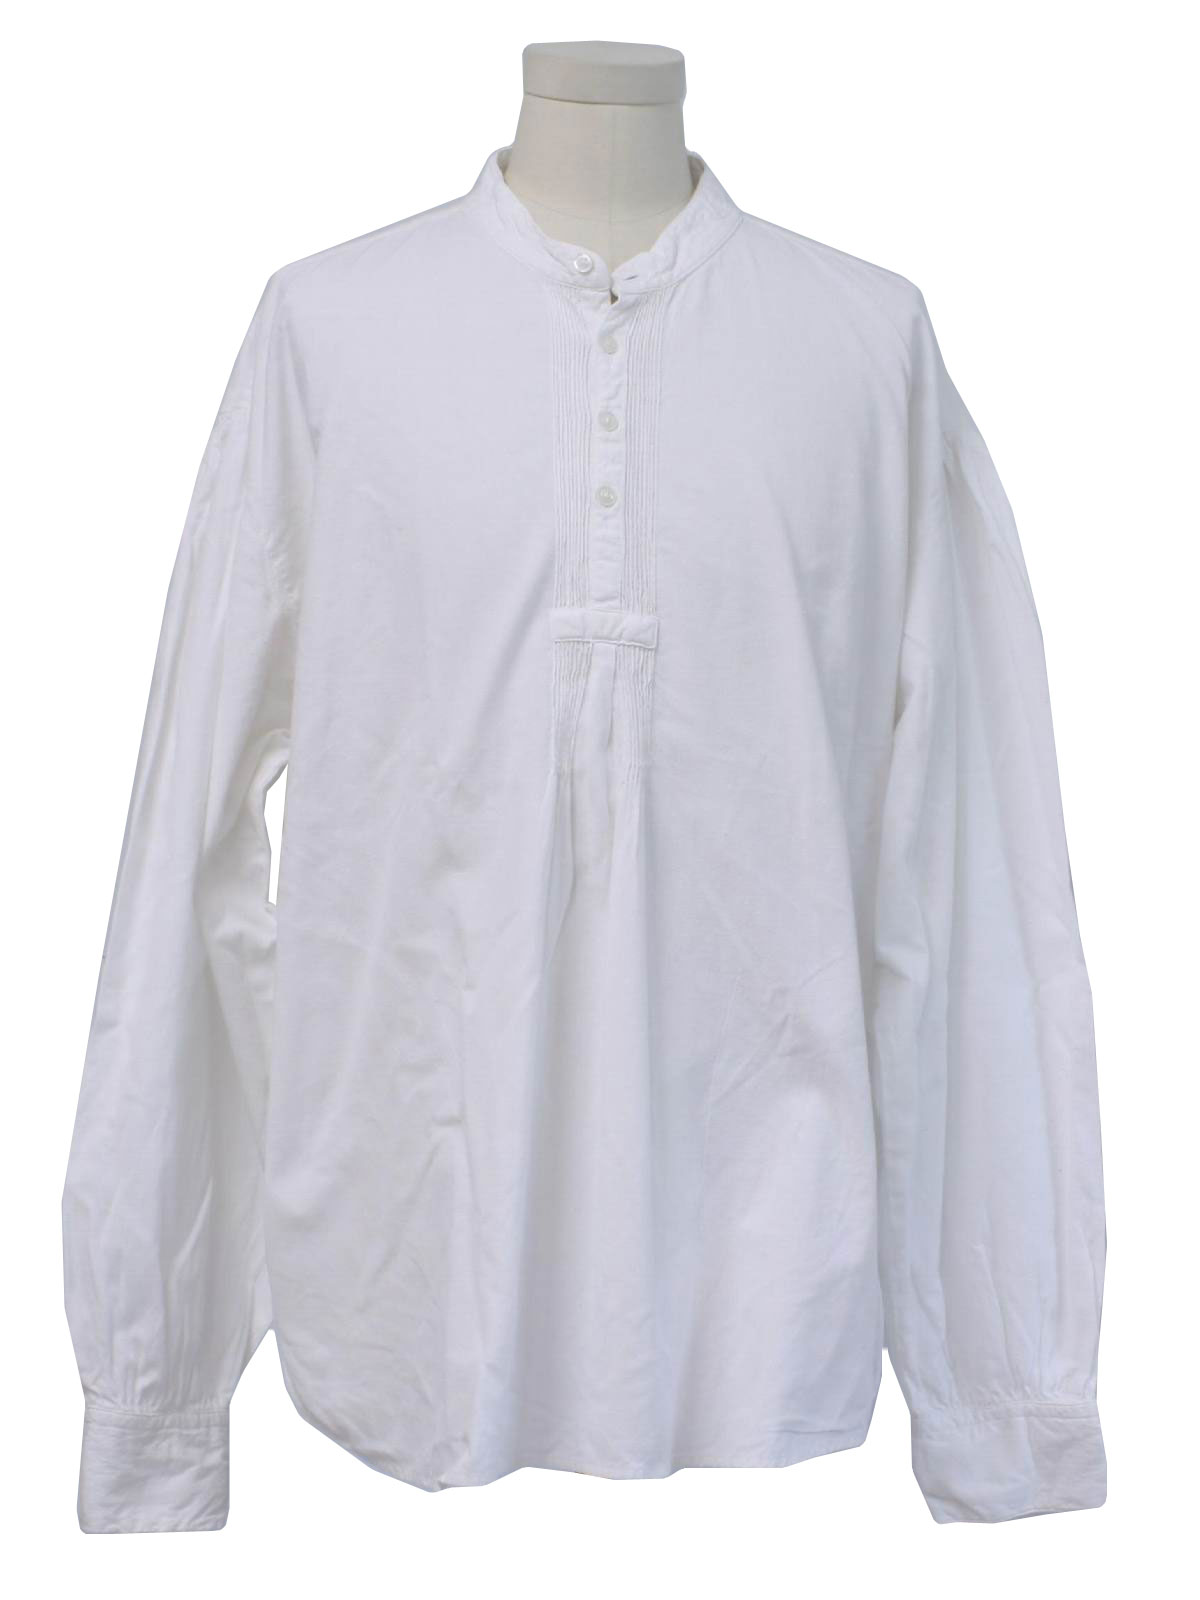 Western Shirt: 90s -Scully- Mens Late 1800s style white cotton long ...